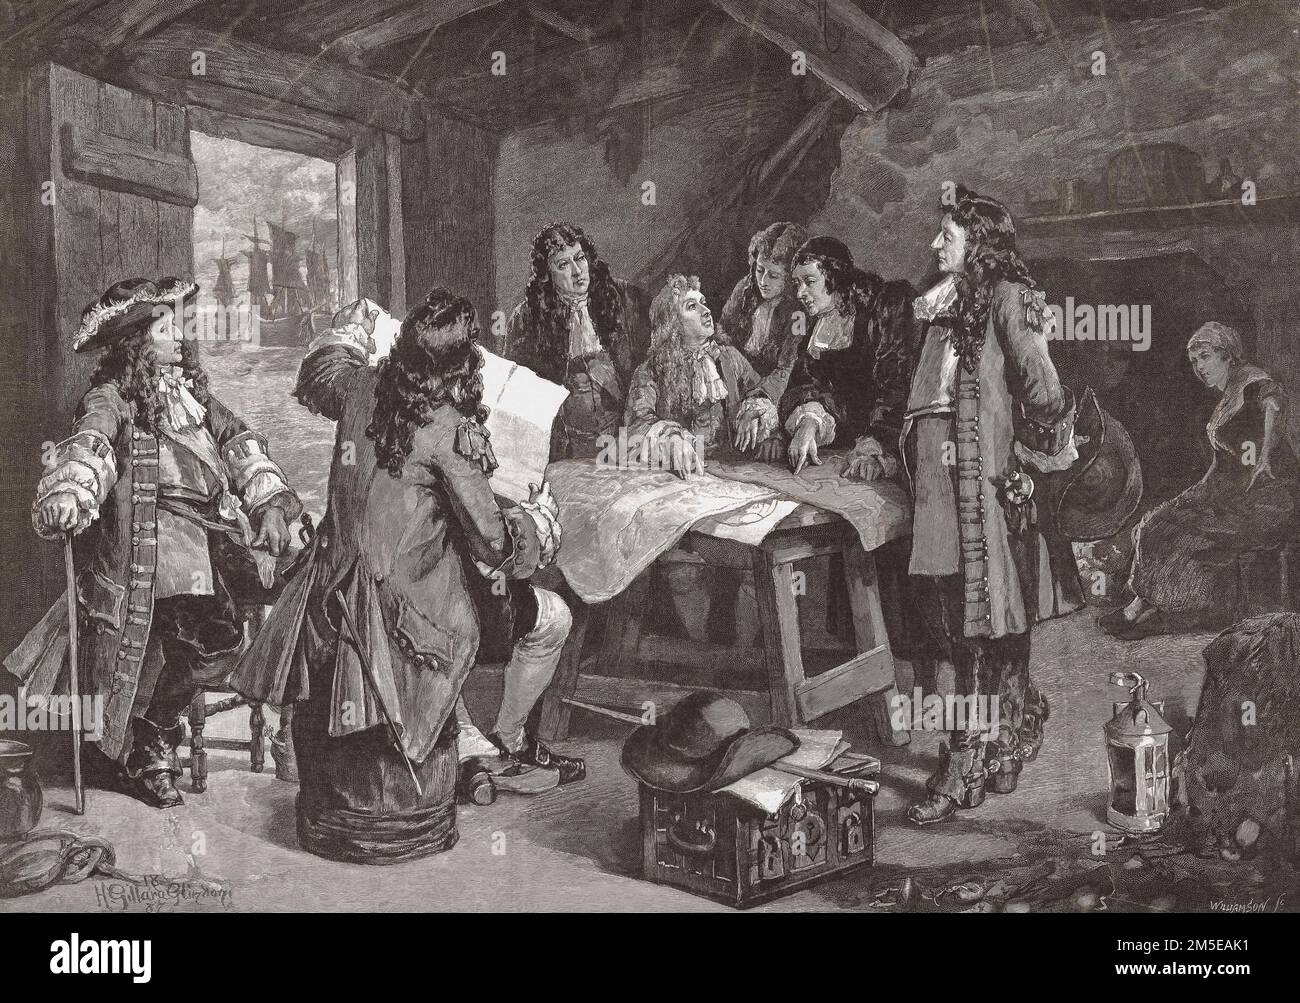 William, Prince of Orange (later King William III) holds war council after landing in Brixham in Torbay, Devon, England, November 5, 1688.  After a late 19th century print by Williamson from the painting by Henry Gillard Glindoni. Stock Photo